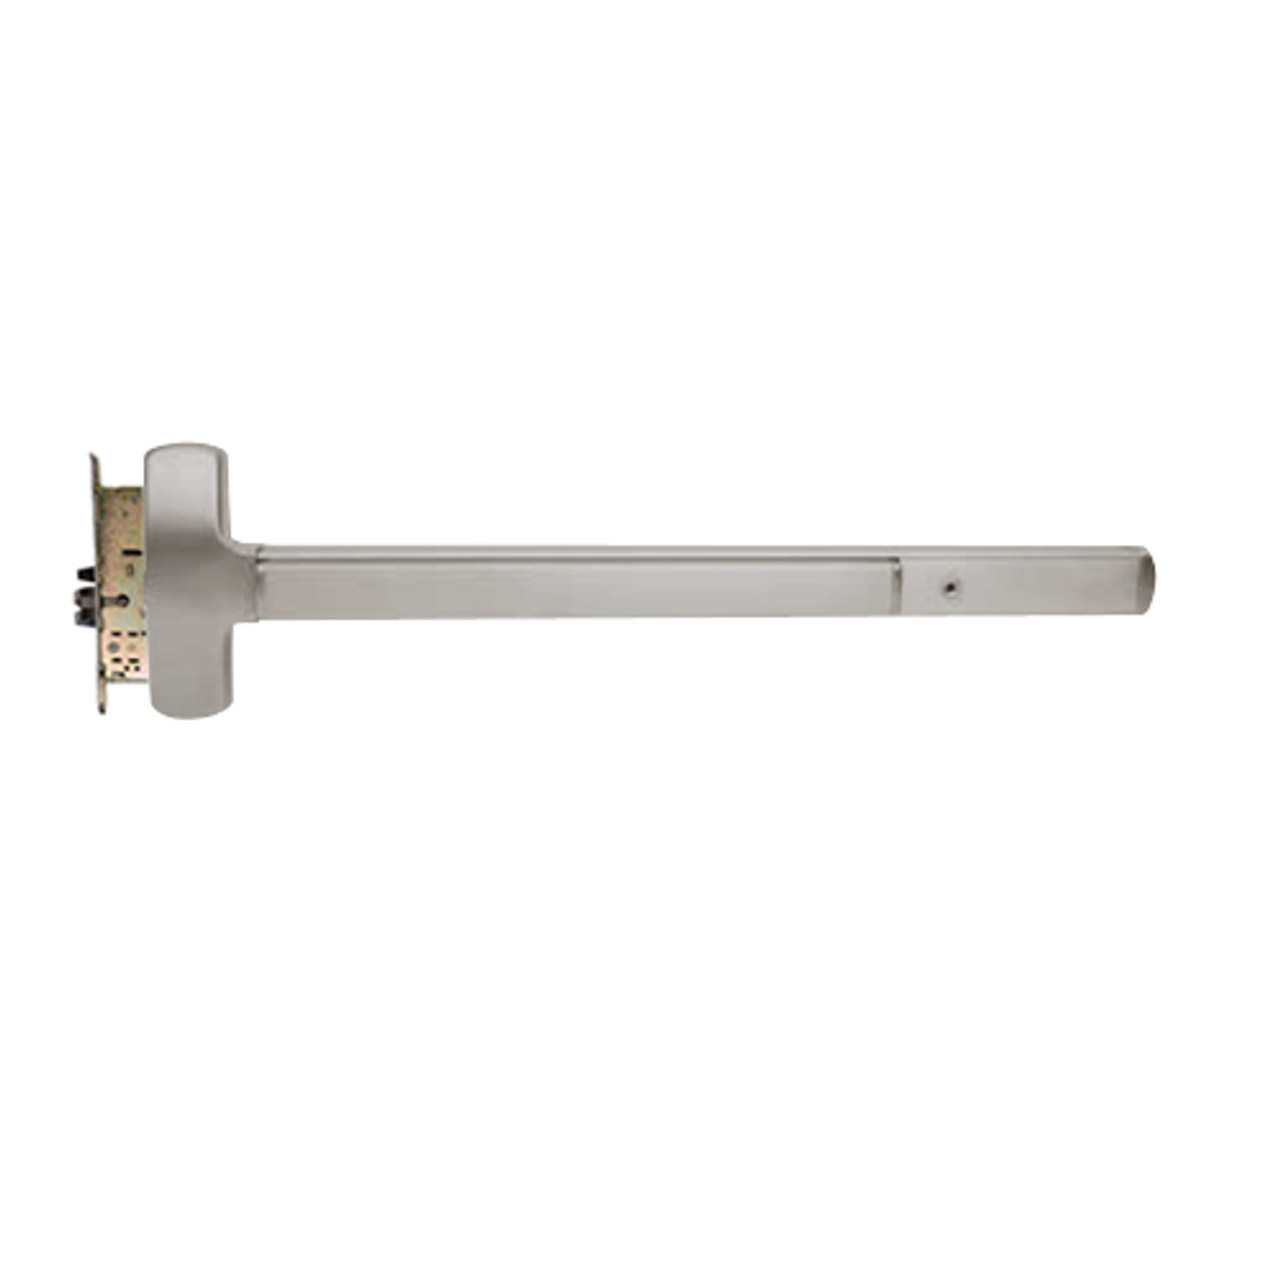 25-M-NL-OP-US32D-4-RHR Falcon Exit Device in Satin Stainless Steel